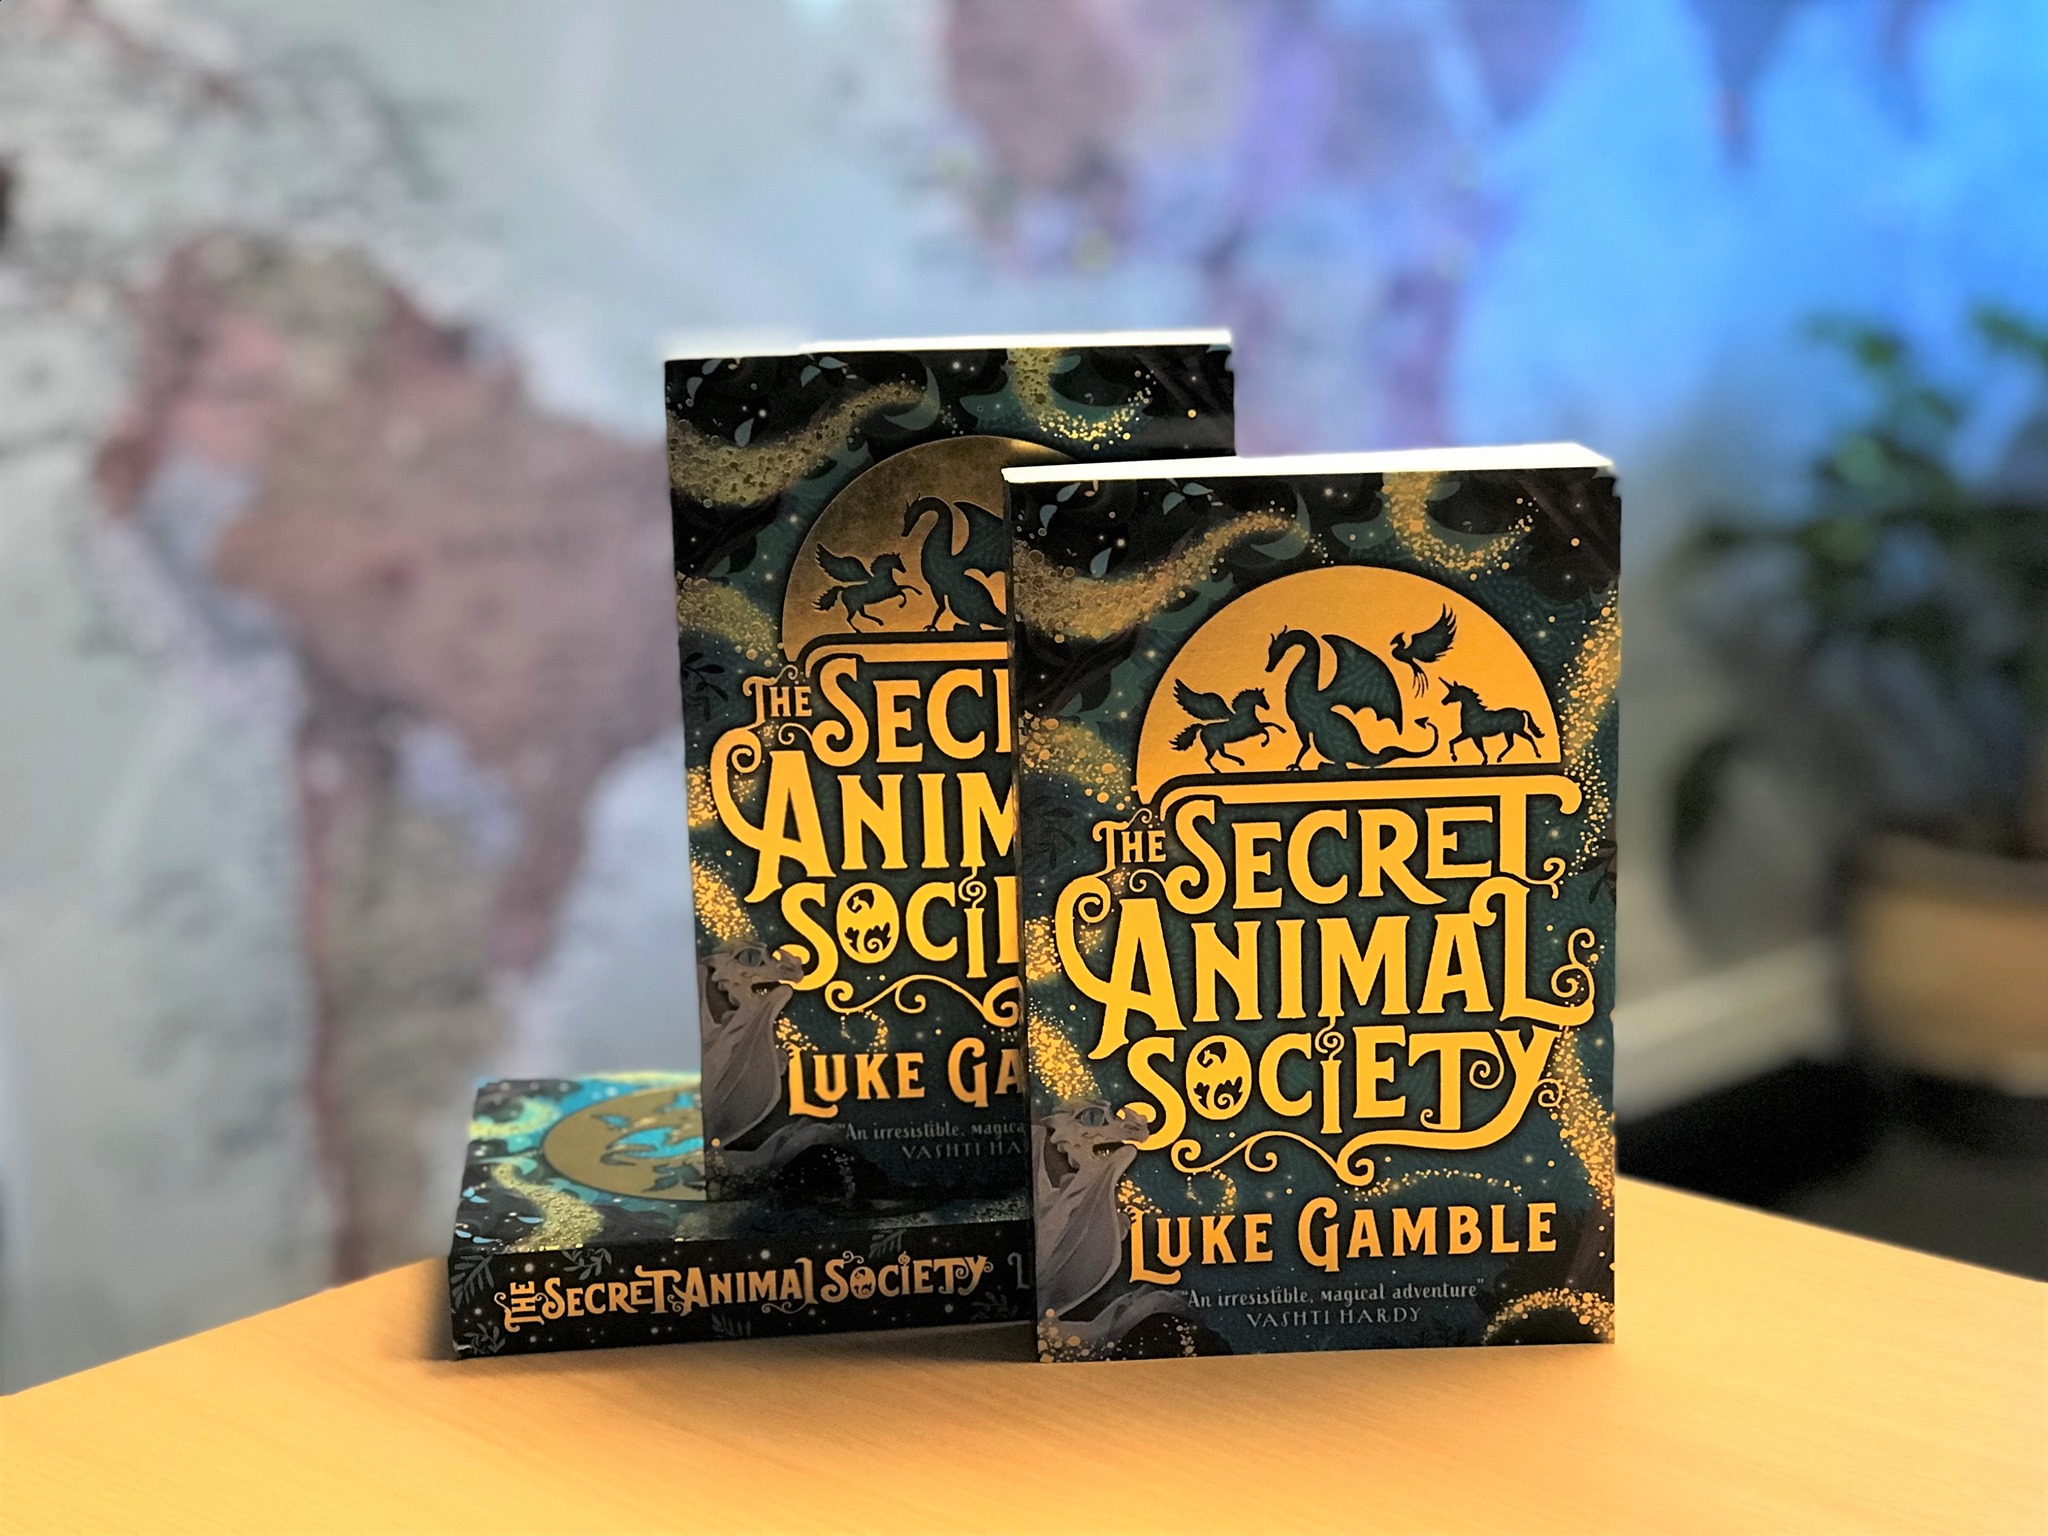 The Secret Animals Society: A Children’s Book by Dr Luke Gamble 